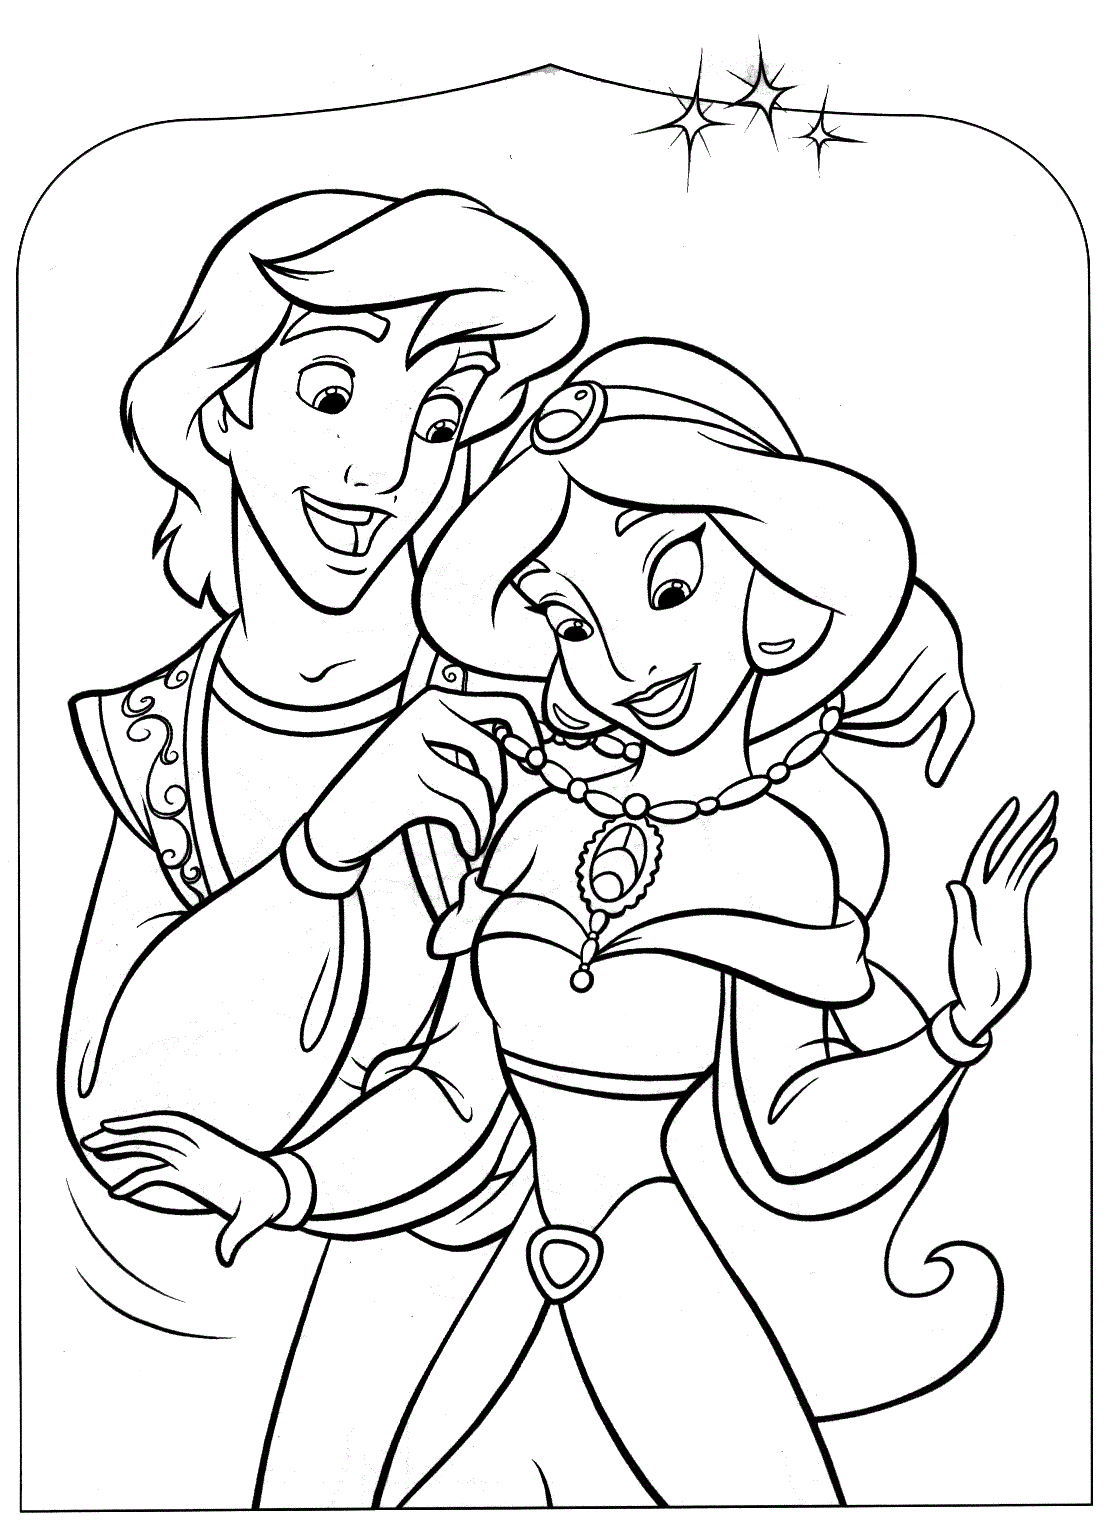 Aladdin Coloring Pages Cartoons Aladdin Printable 2020 0330 Coloring4free